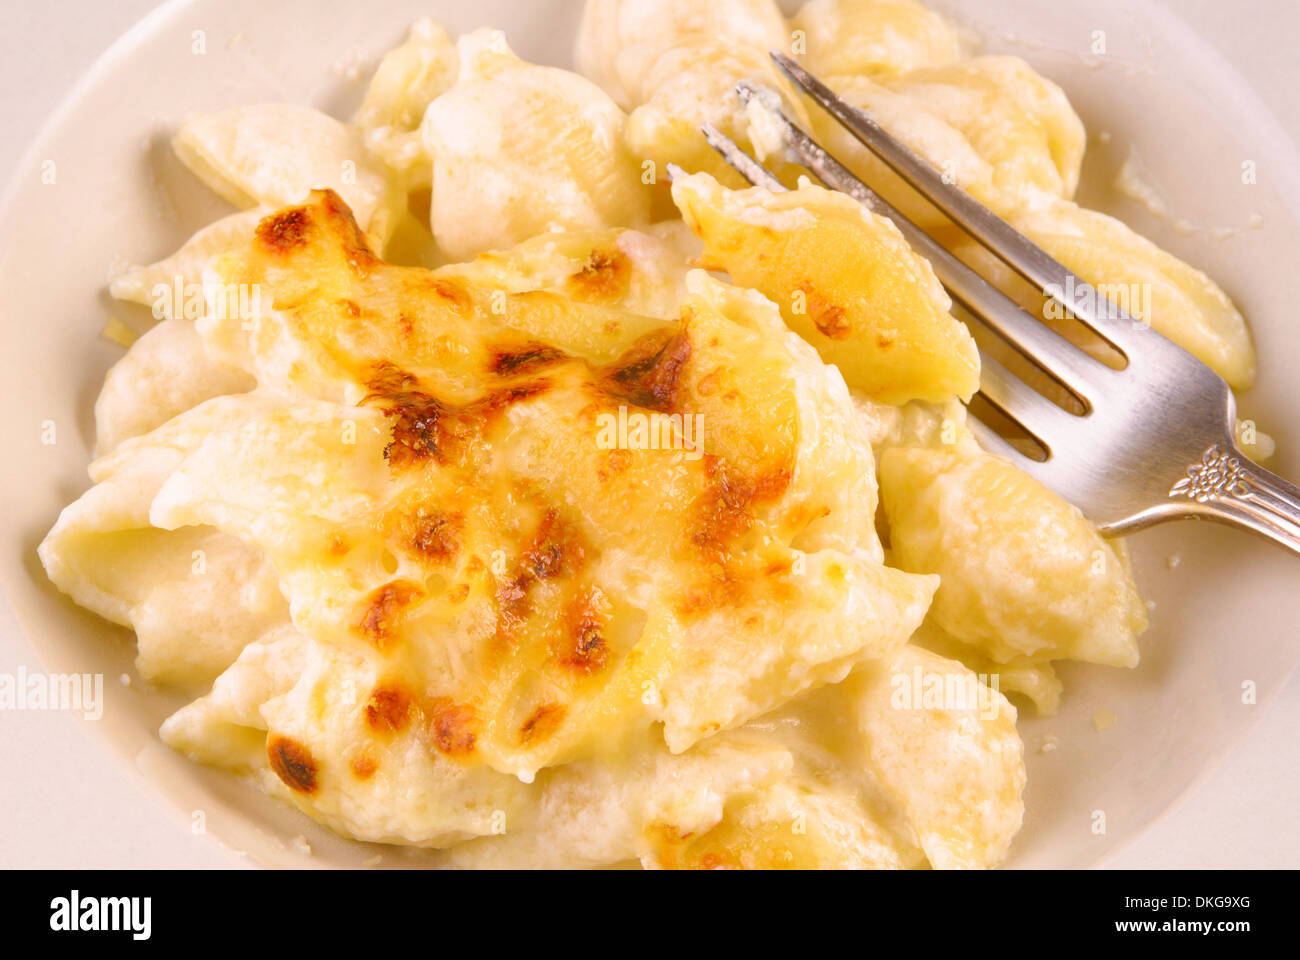 Baked Macaroni and Cheese with a fork Stock Photo